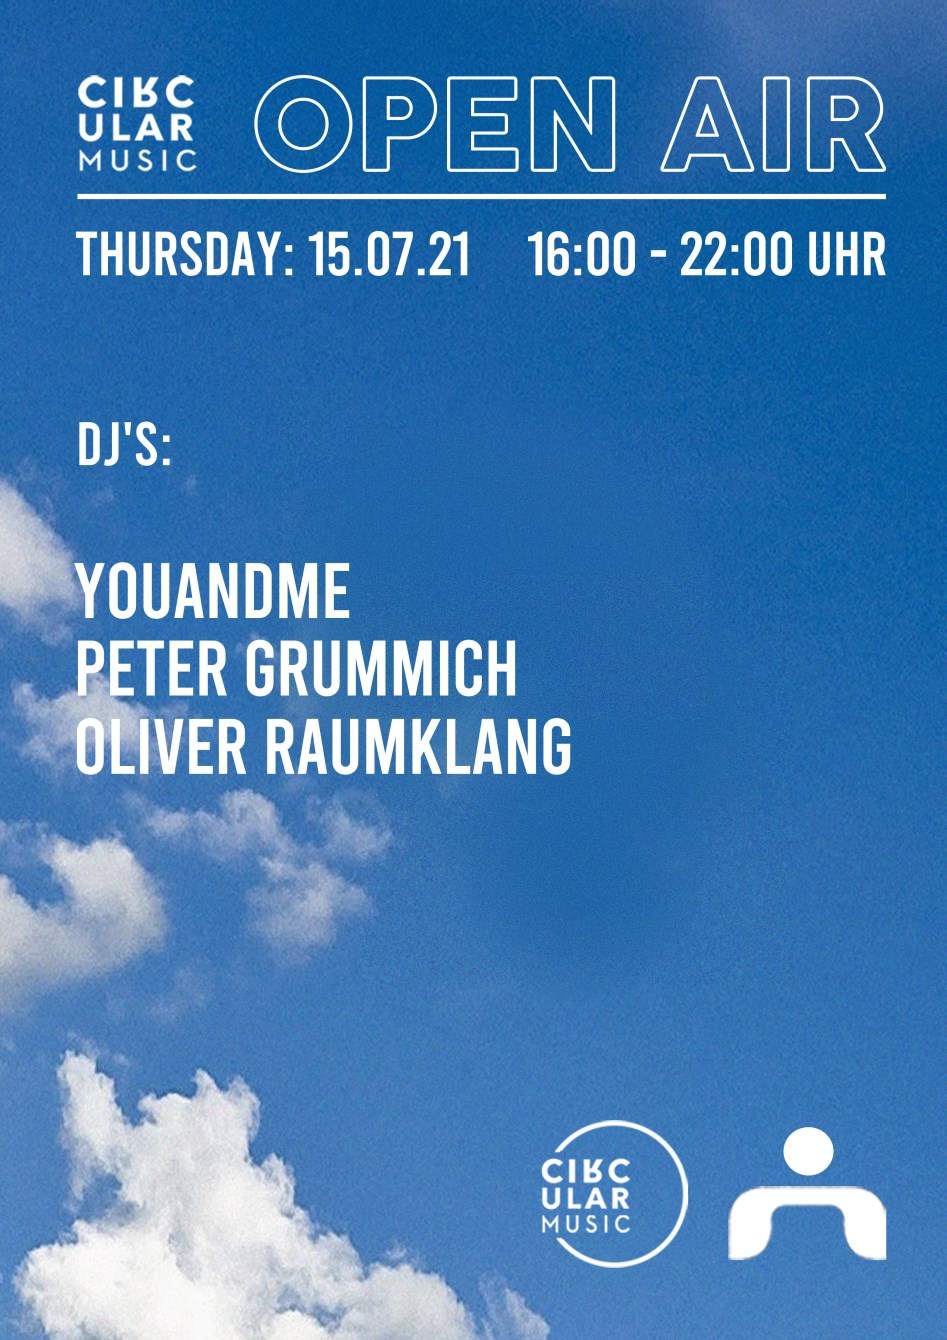 Circular Music 'Open Air' with youANDme, Peter Grummich and More - Página frontal